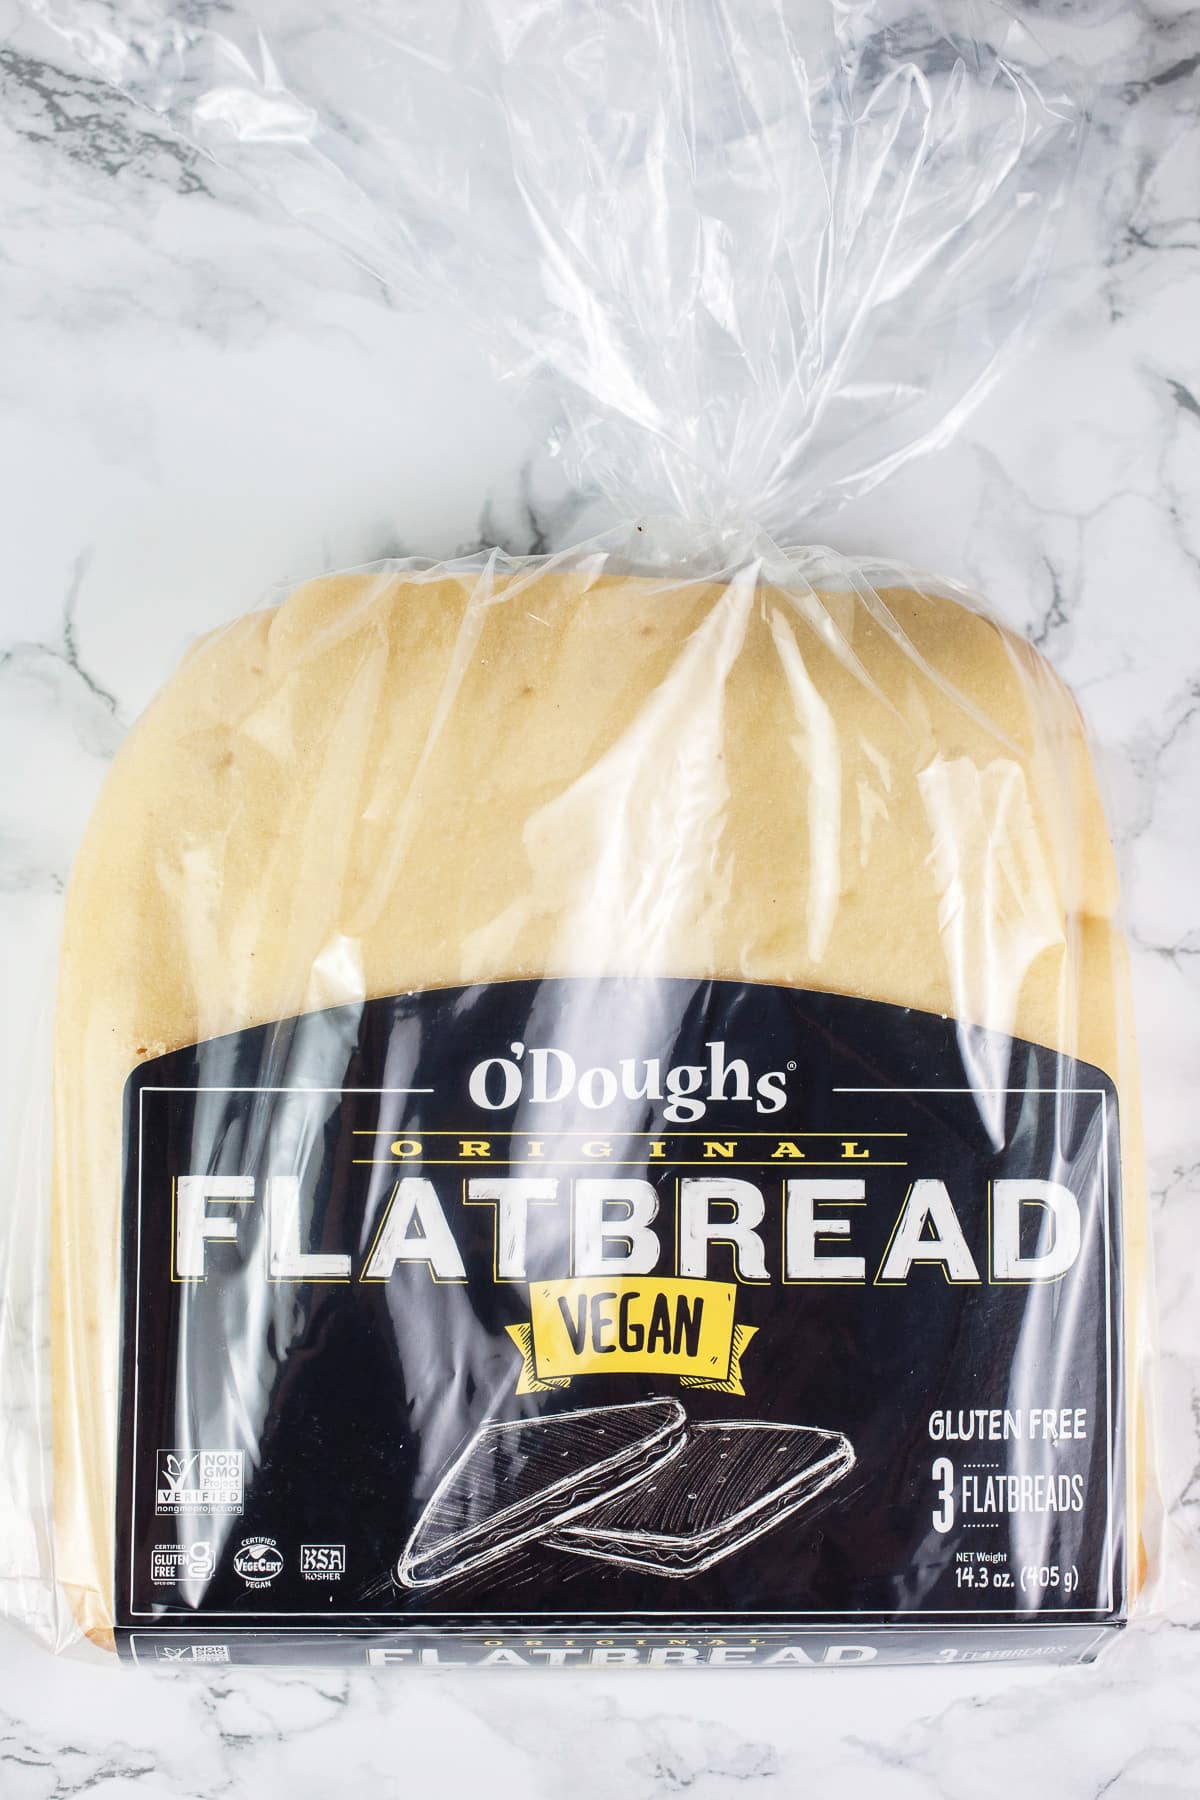 Gluten free flatbread in package on white surface.